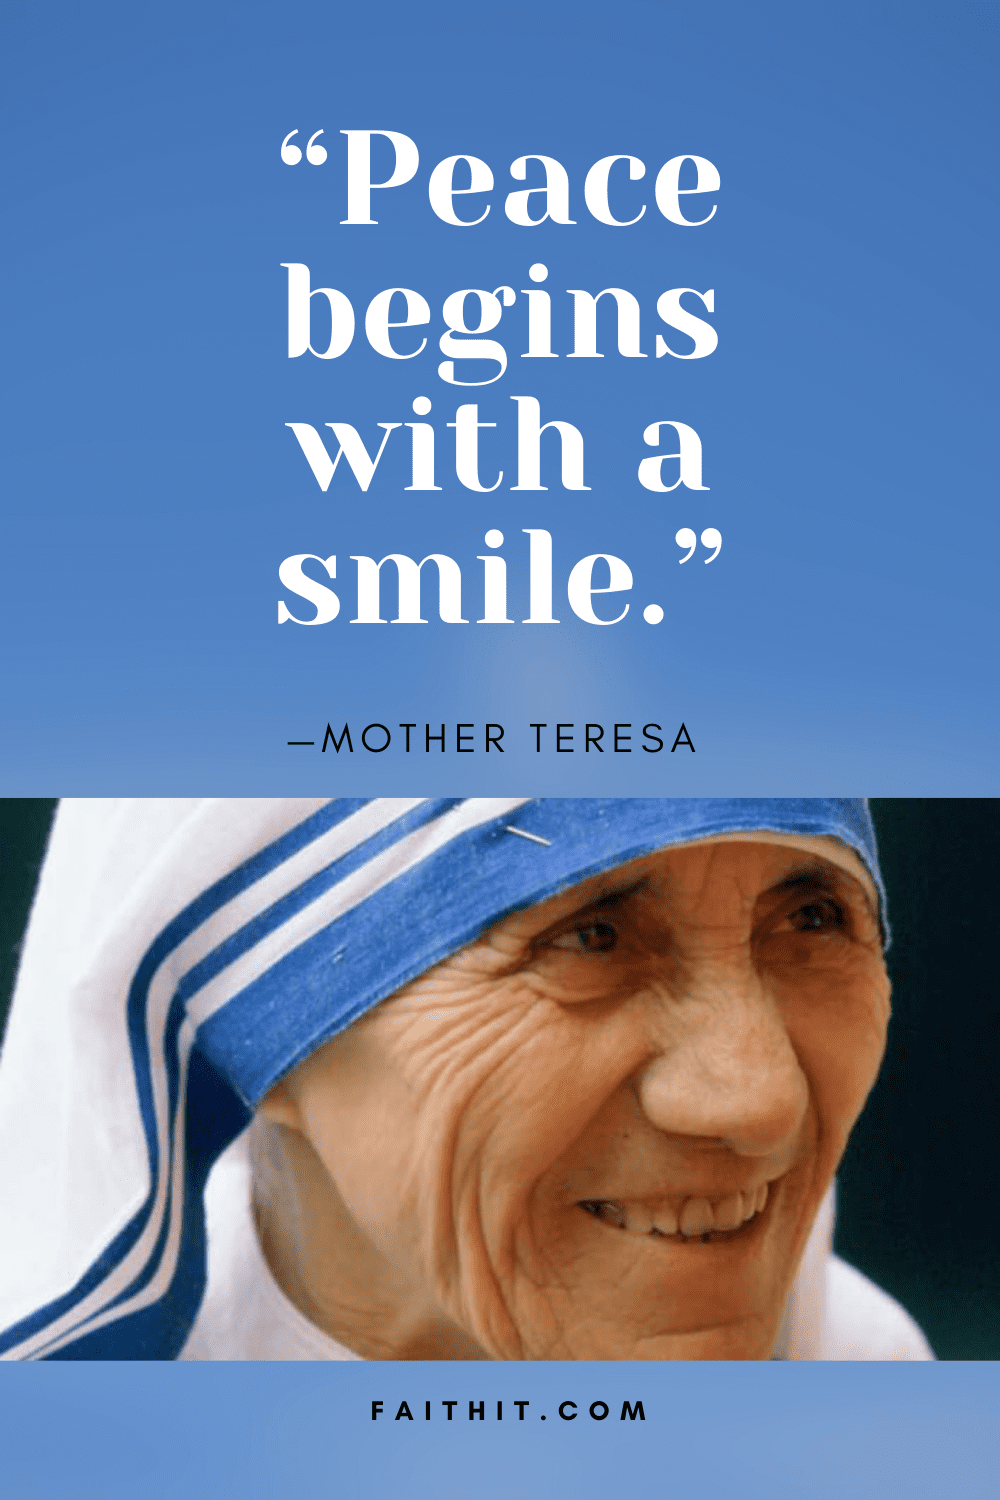 poverty quotes mother teresa